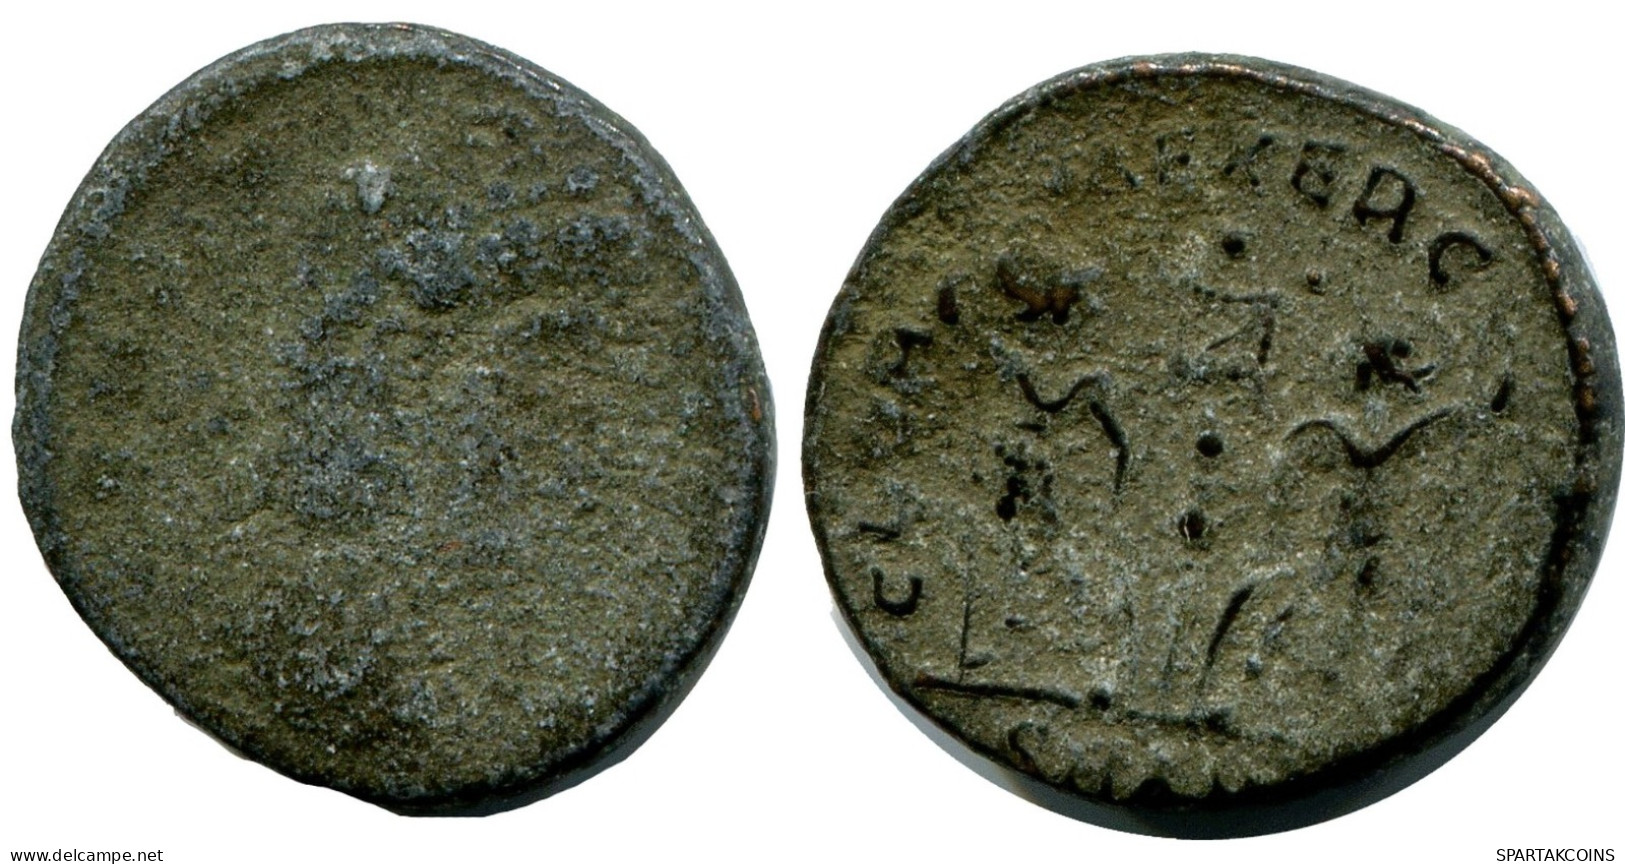 ROMAN Pièce MINTED IN ALEKSANDRIA FOUND IN IHNASYAH HOARD EGYPT #ANC10150.14.F.A - The Christian Empire (307 AD Tot 363 AD)